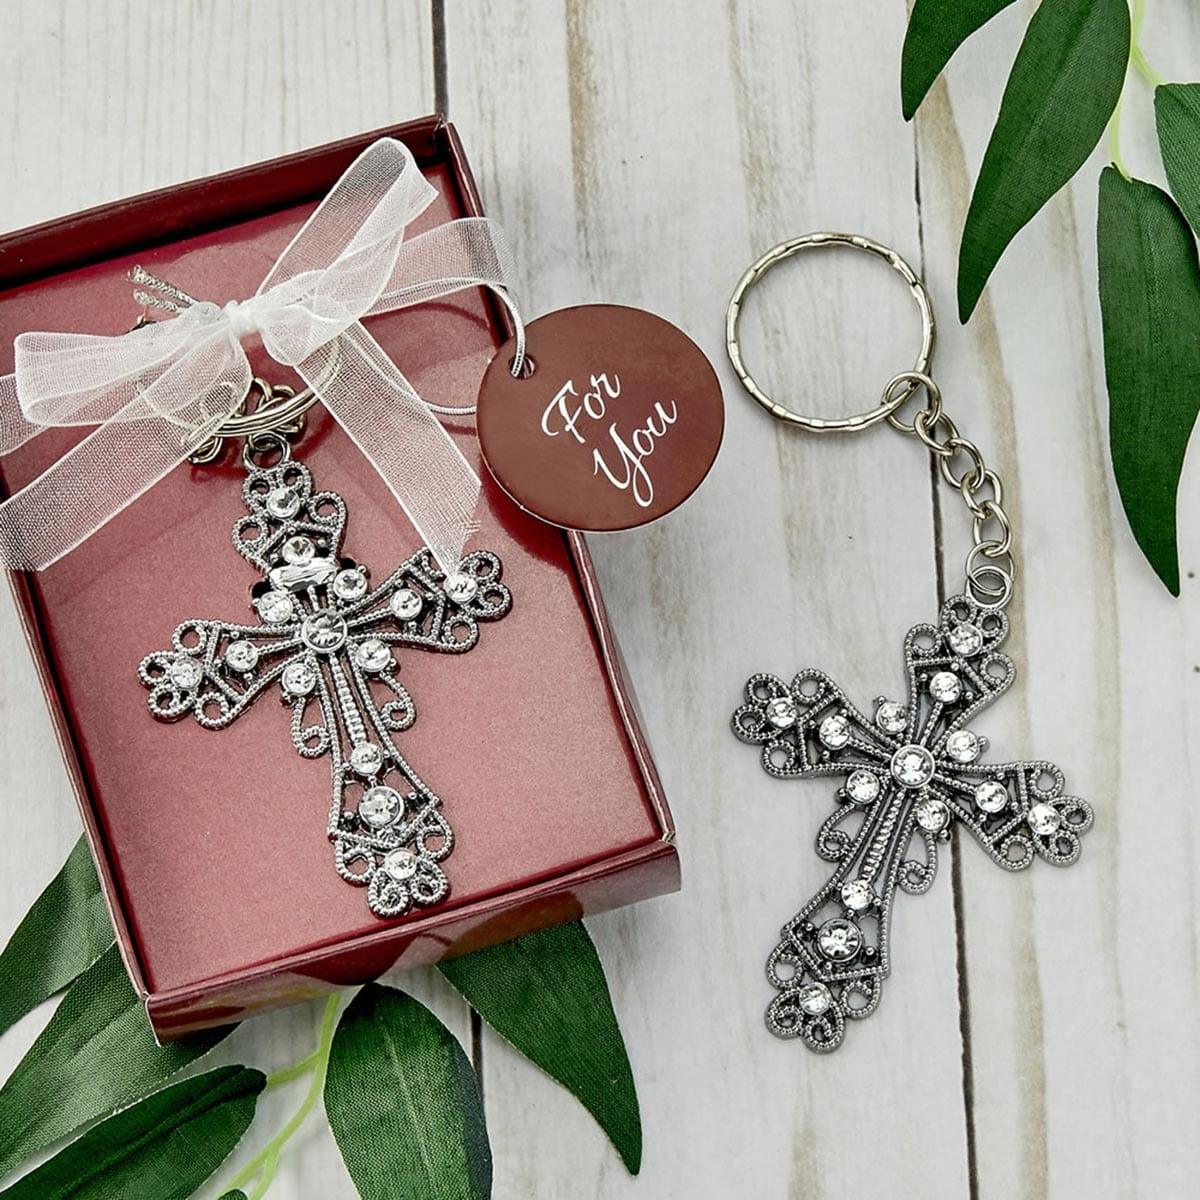 Buy Religious Cross Keychain - Silver sold at Party Expert